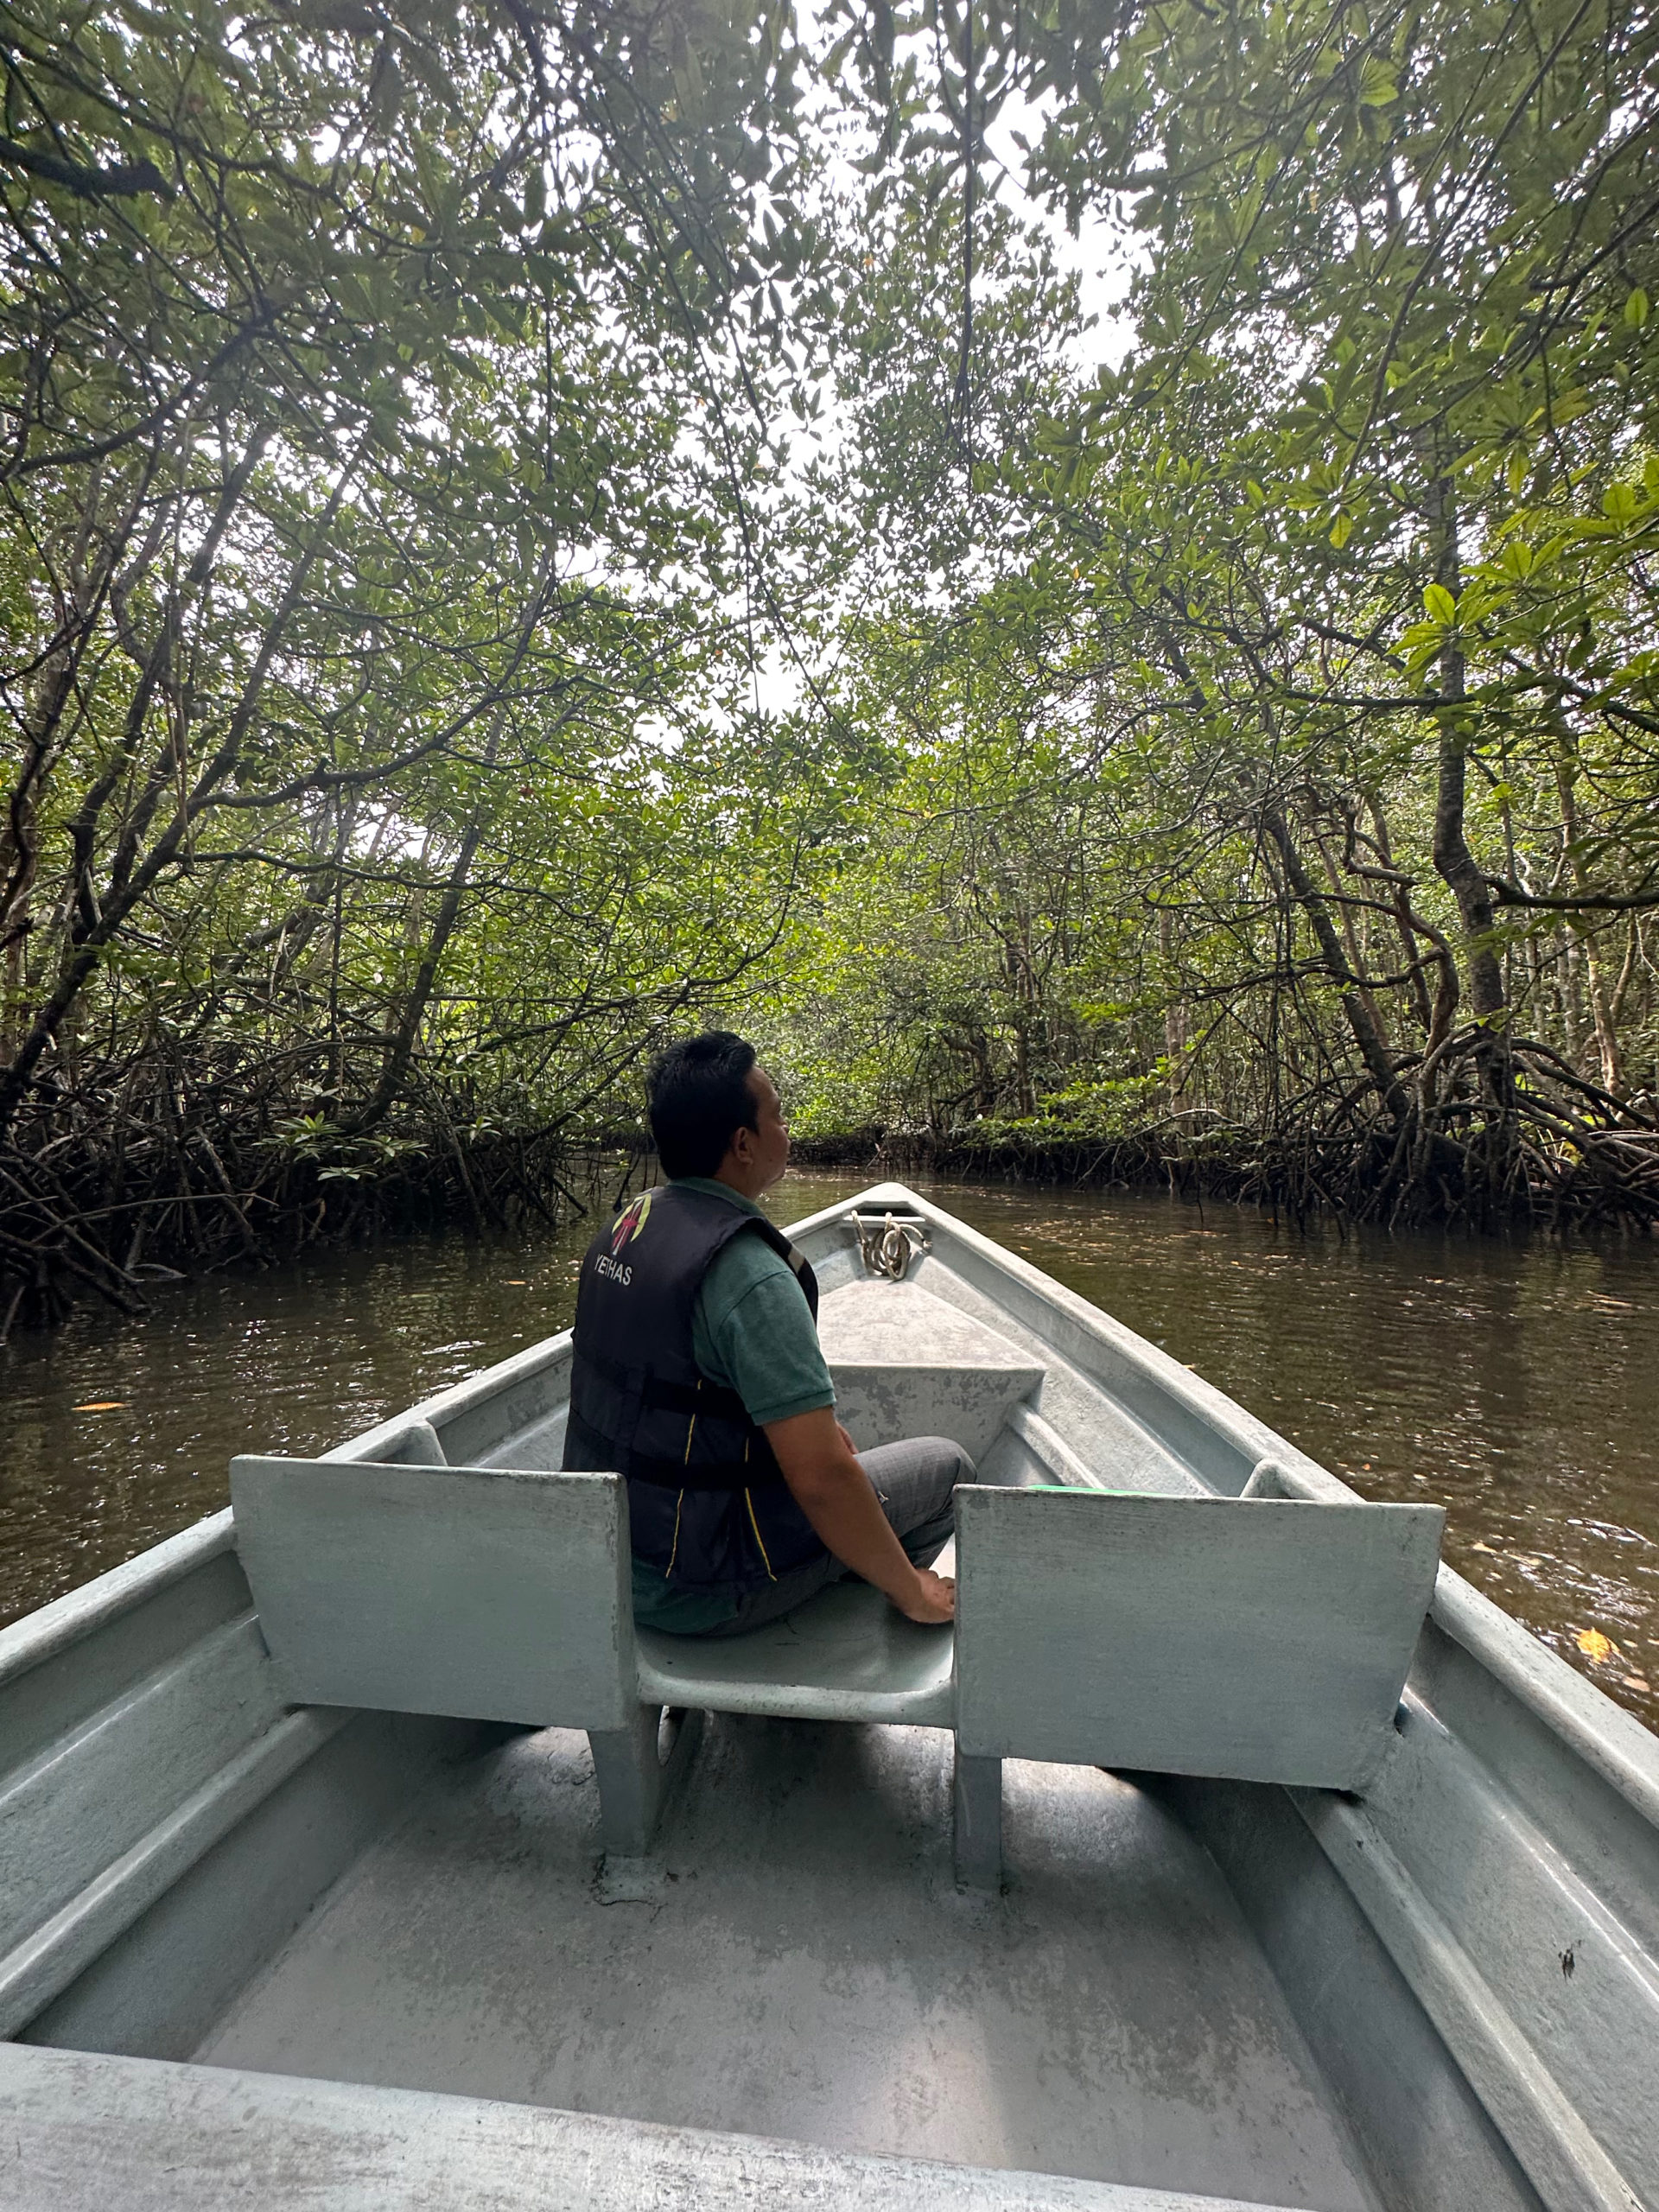 The mangrove tour is good way to pass a couple hours. 